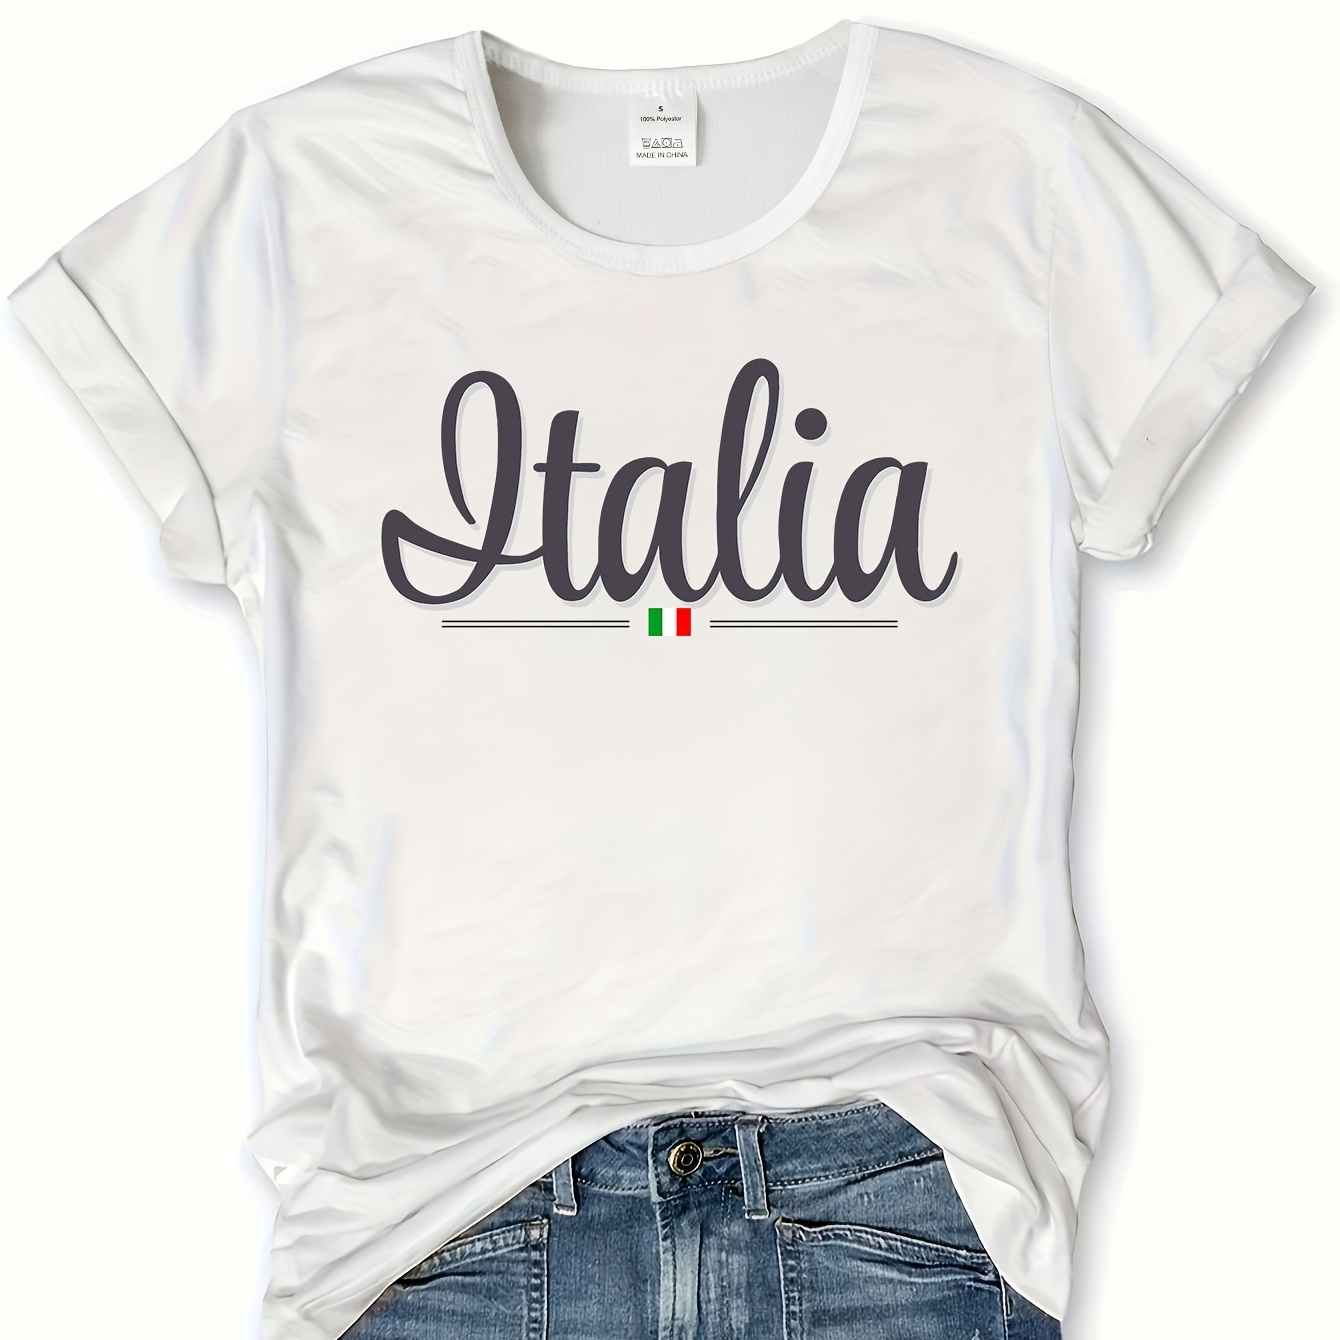 

Italia Letter Print T-shirt, Short Sleeve Crew Neck Casual Top For Summer & Spring, Women's Clothing